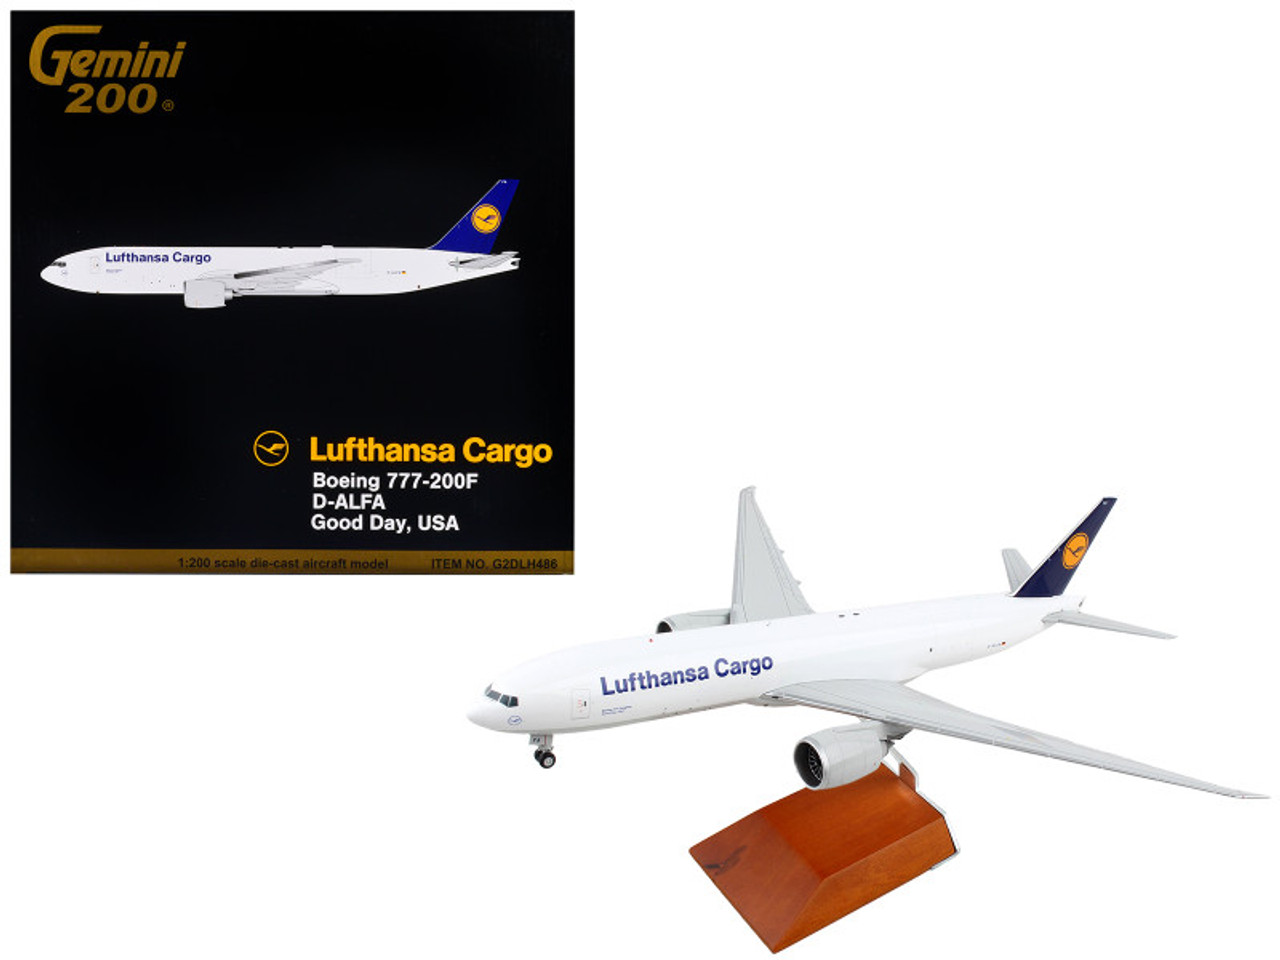 Boeing 777-200F Commercial Aircraft "Lufthansa Cargo" White with Blue Tail "Gemini 200" Series 1/200 Diecast Model Airplane by GeminiJets